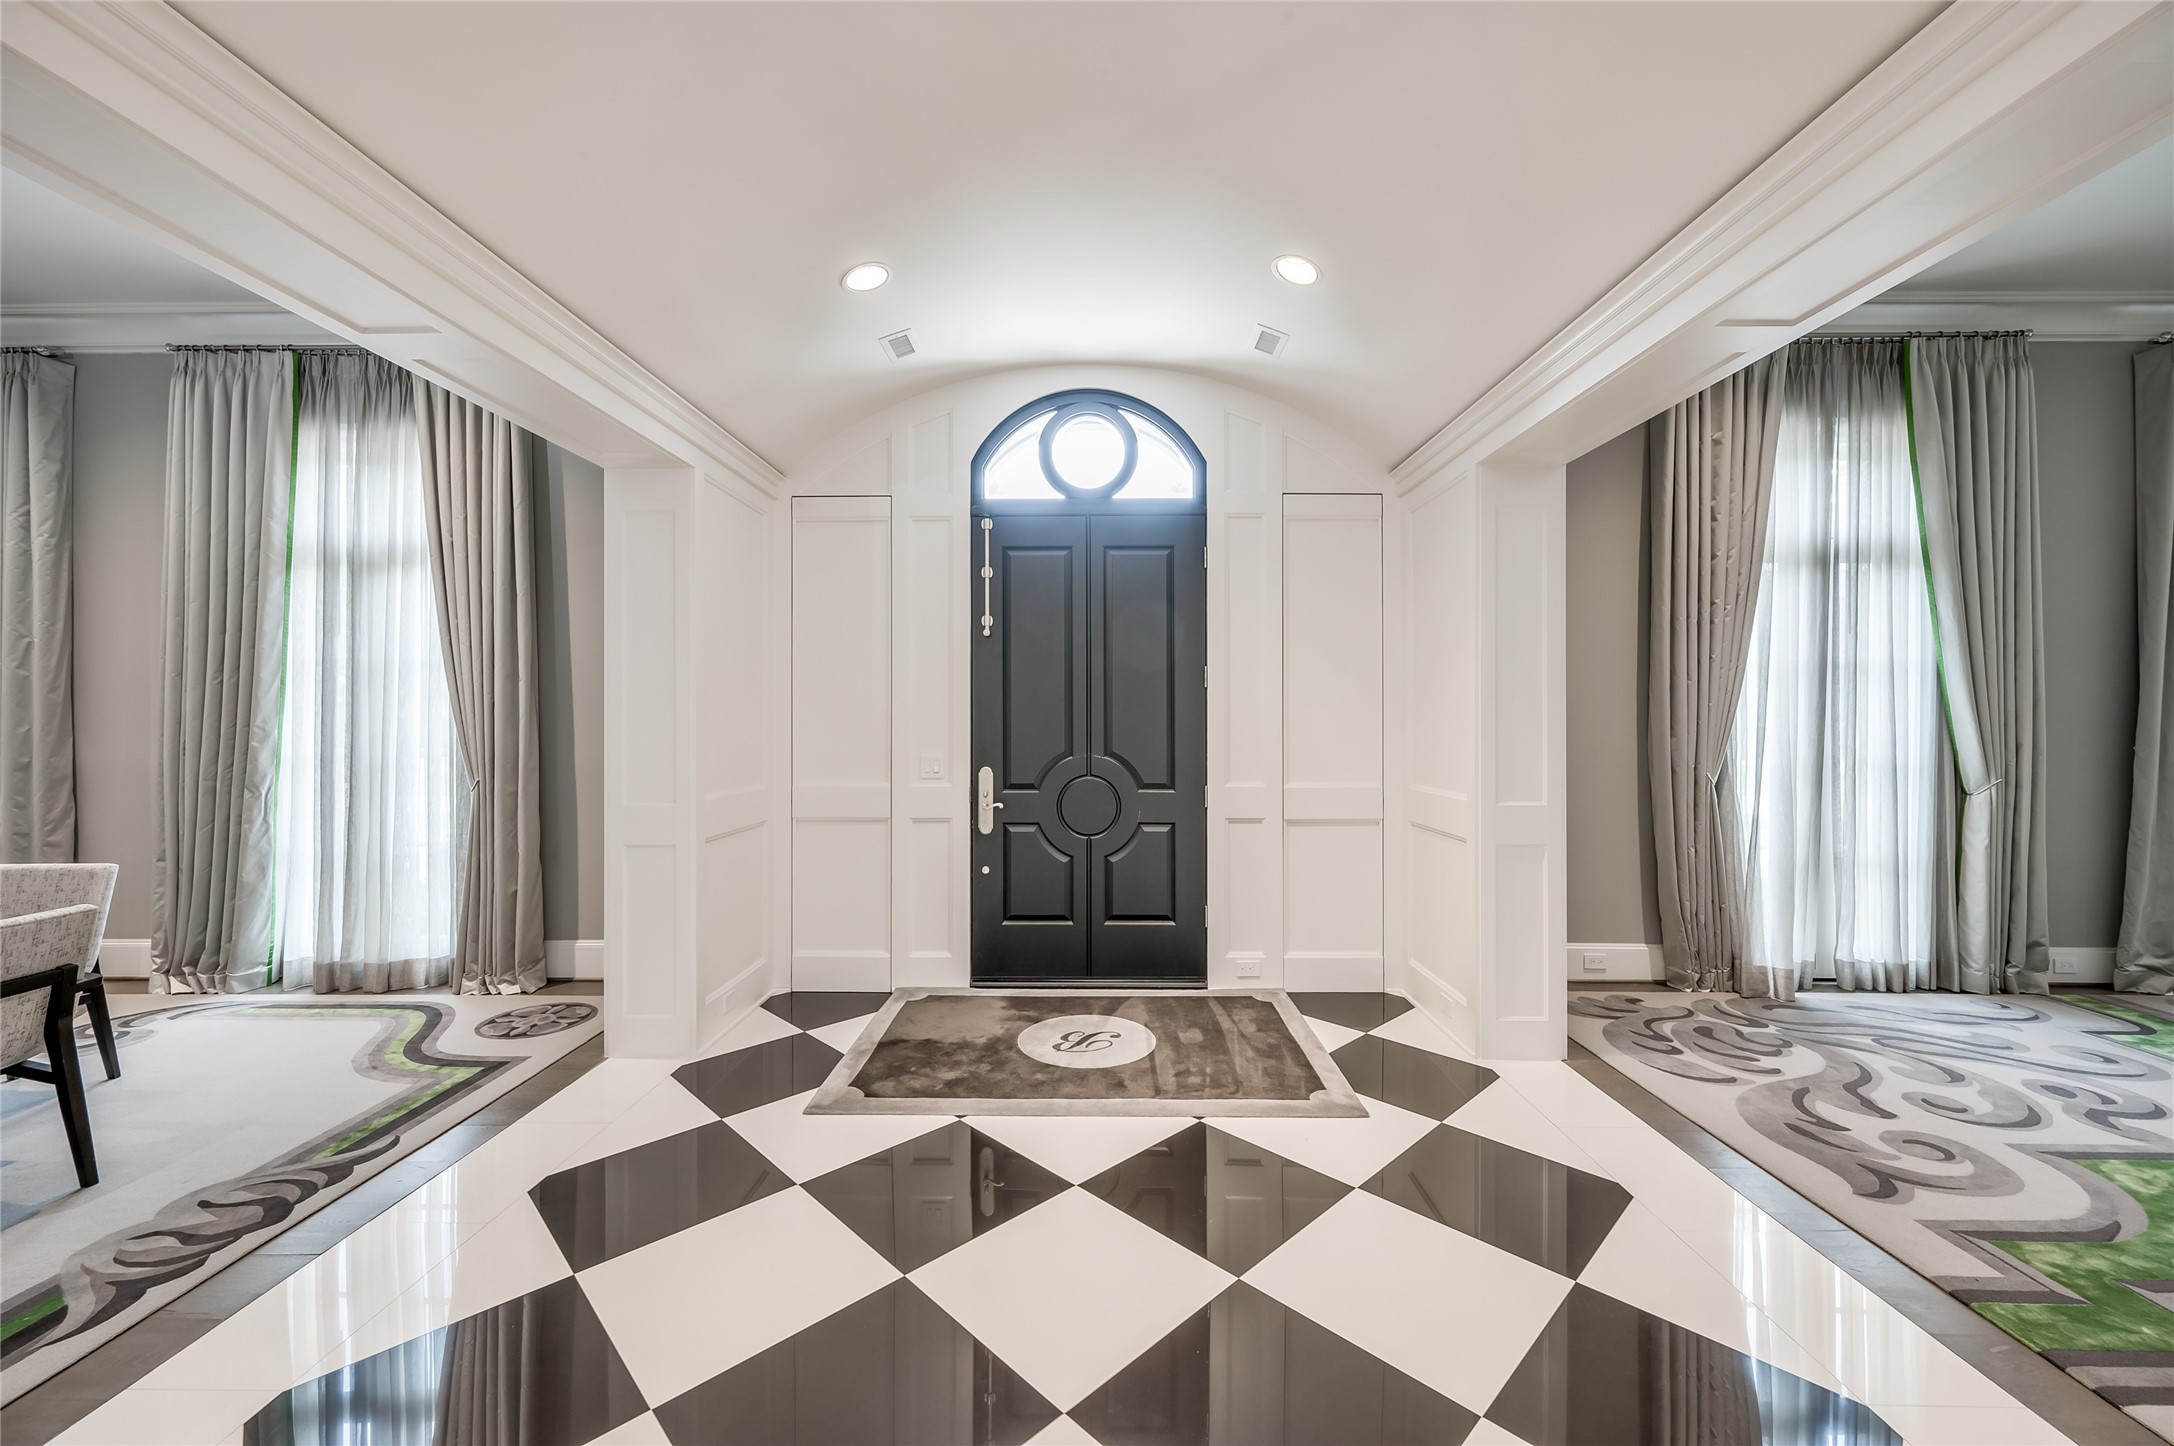 [Foyer]
Beneath a barrel ceiling, this stunning black and white marble floor makes a dramatic statement. Note dining room (left) and living room (right).